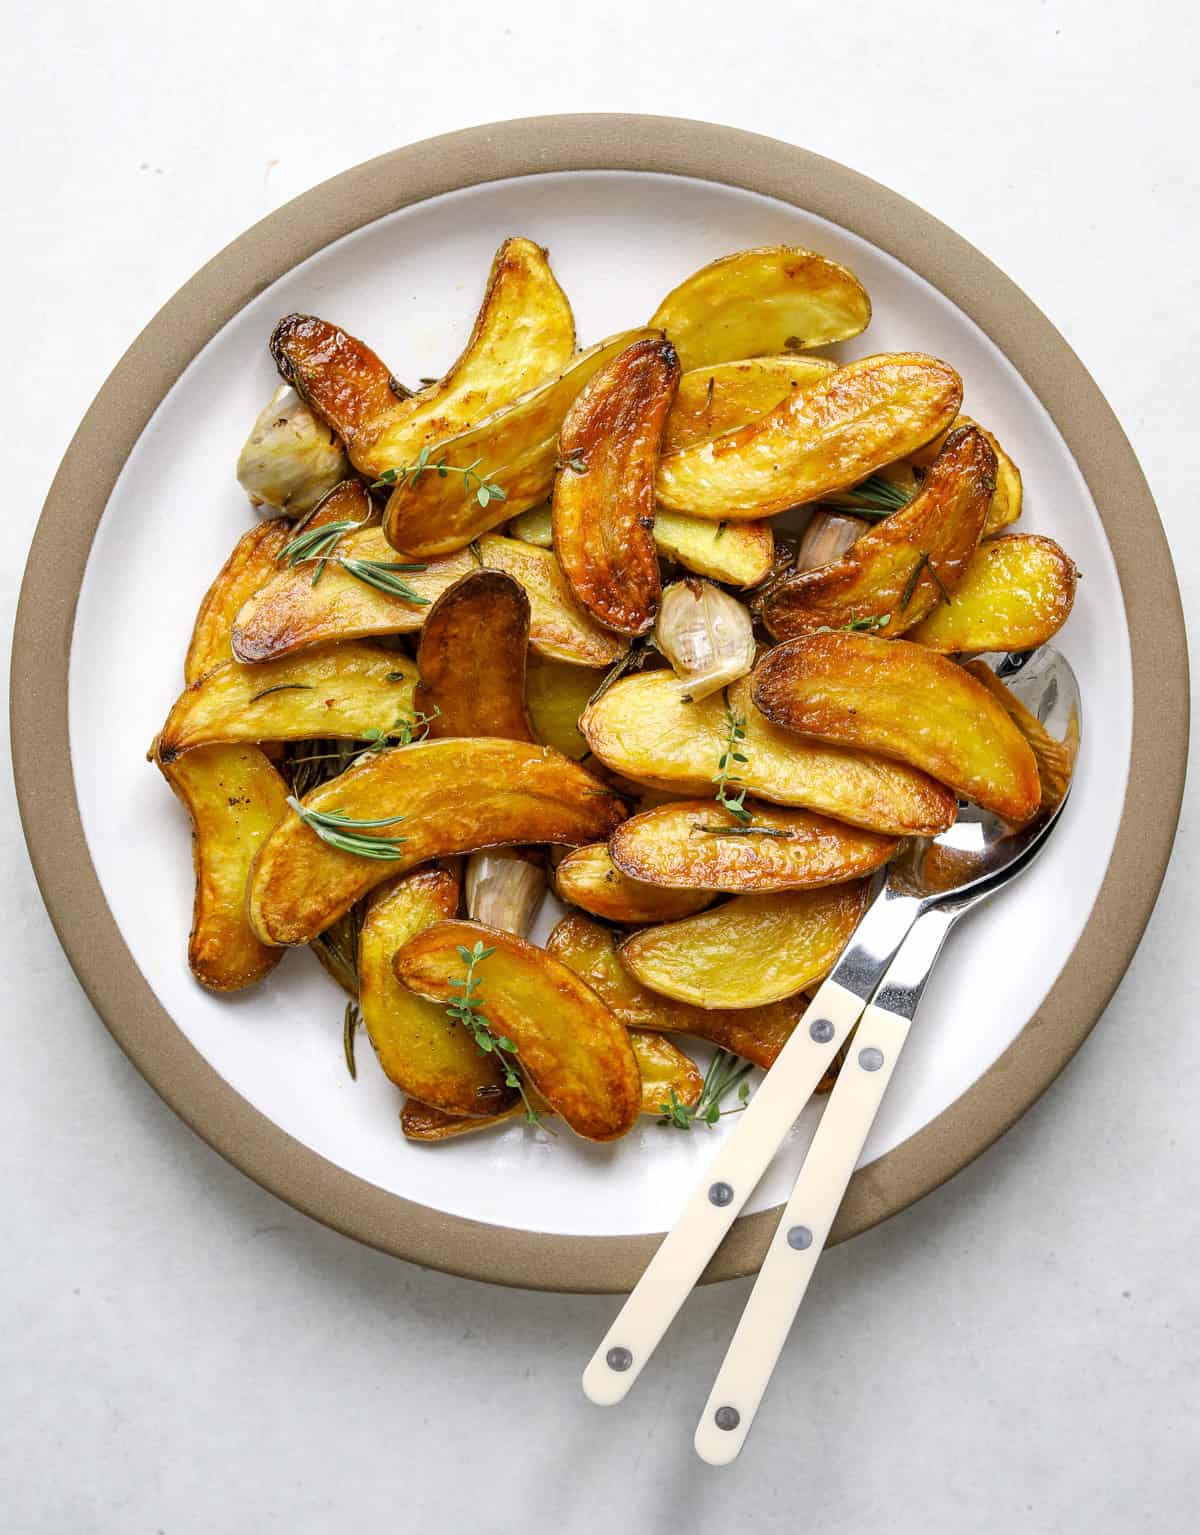 Roasted Fingerling Potatoes with Garlic and Rosemary